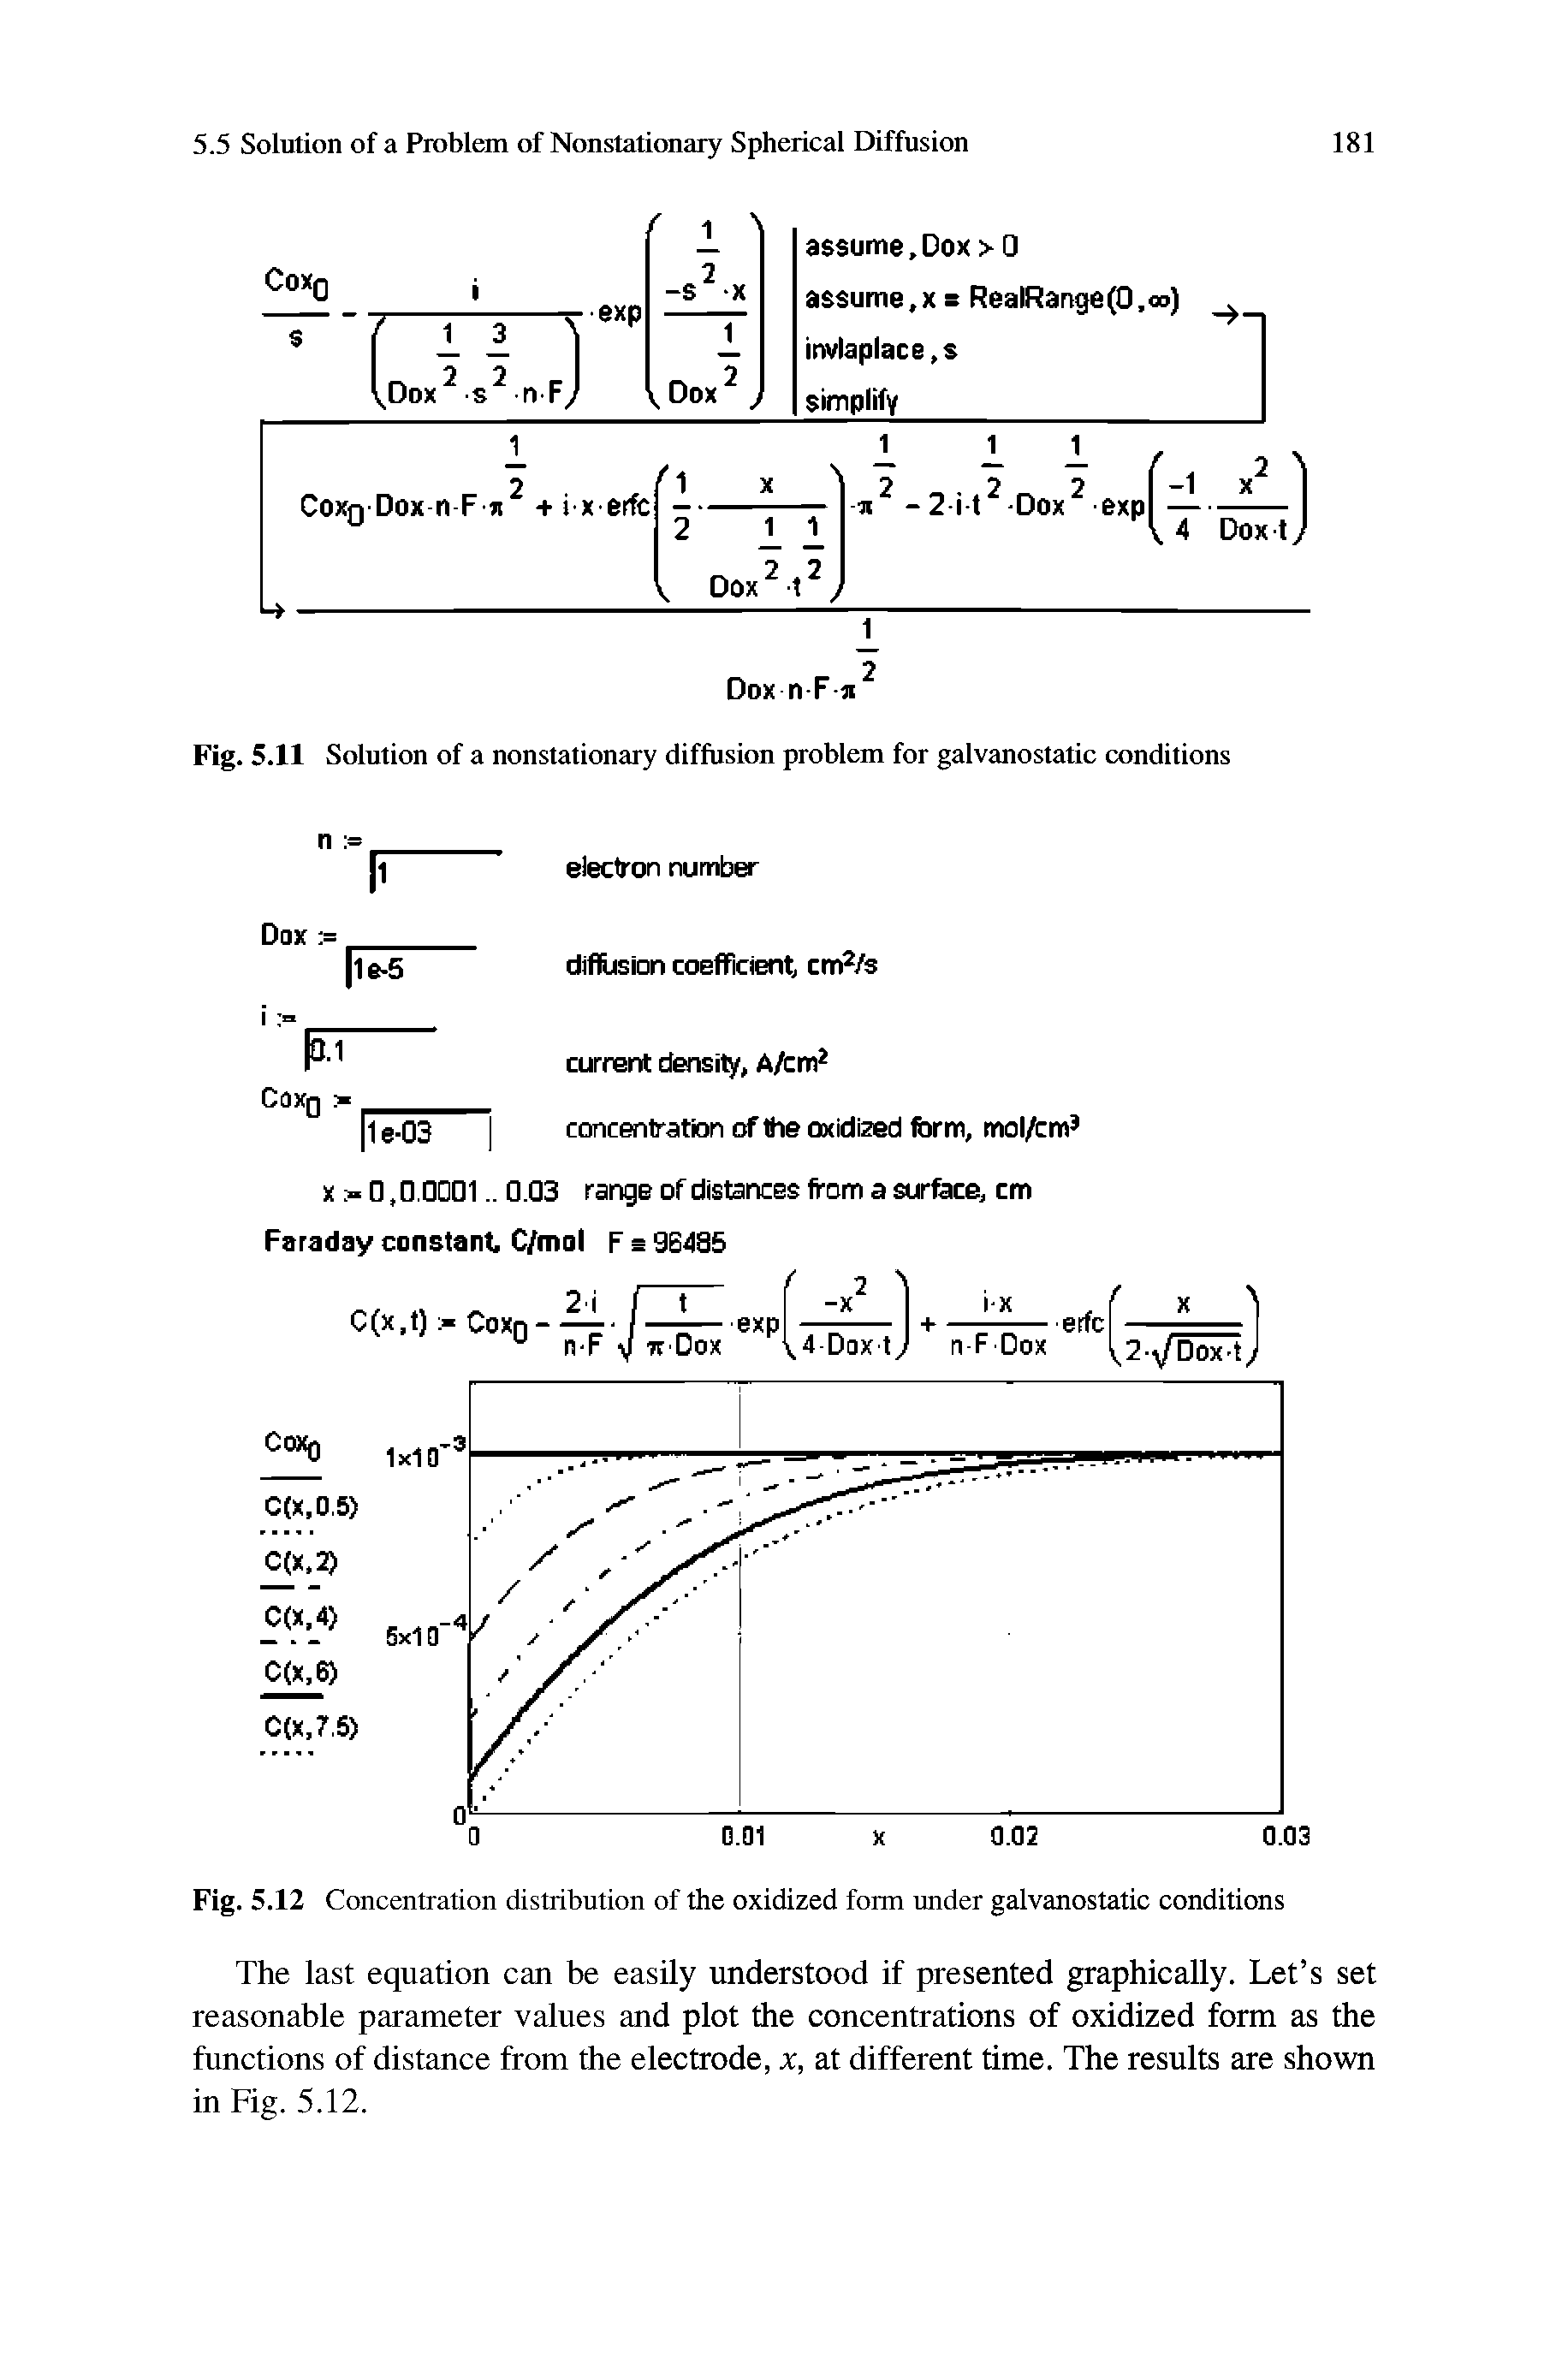 Fig. 5.11 Solution of a nonstationary diffusion problem for galvanostatic conditions...